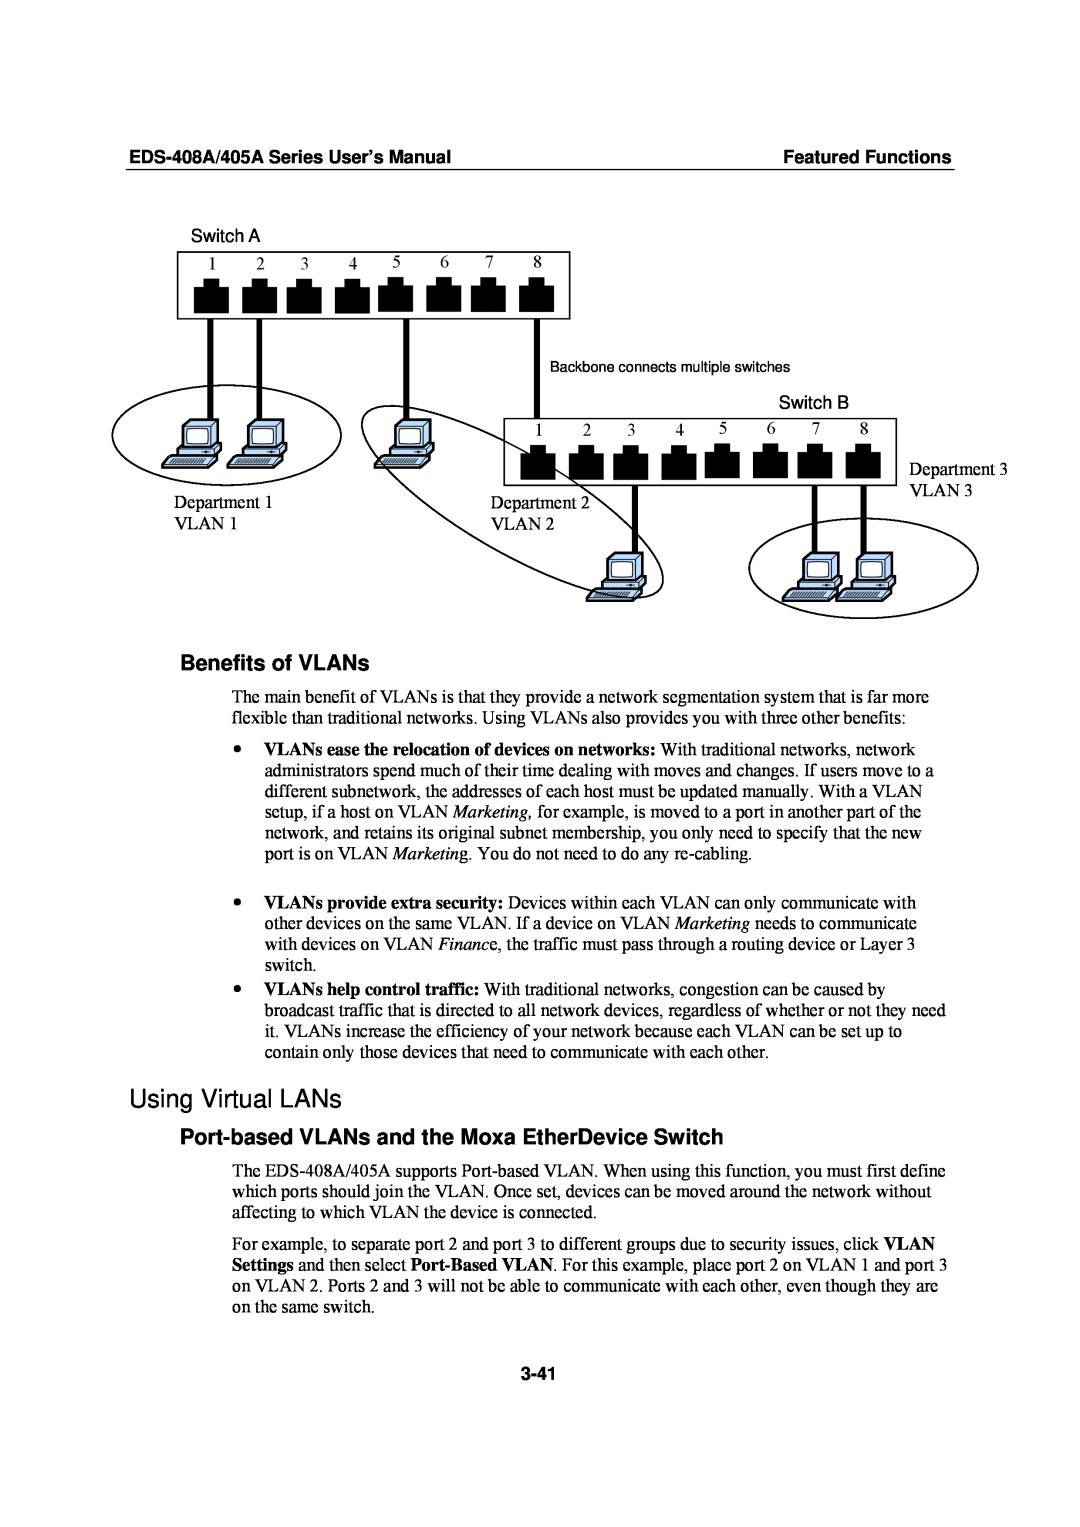 Moxa Technologies EDS-408A Using Virtual LANs, Benefits of VLANs, Port-based VLANs and the Moxa EtherDevice Switch, 3-41 